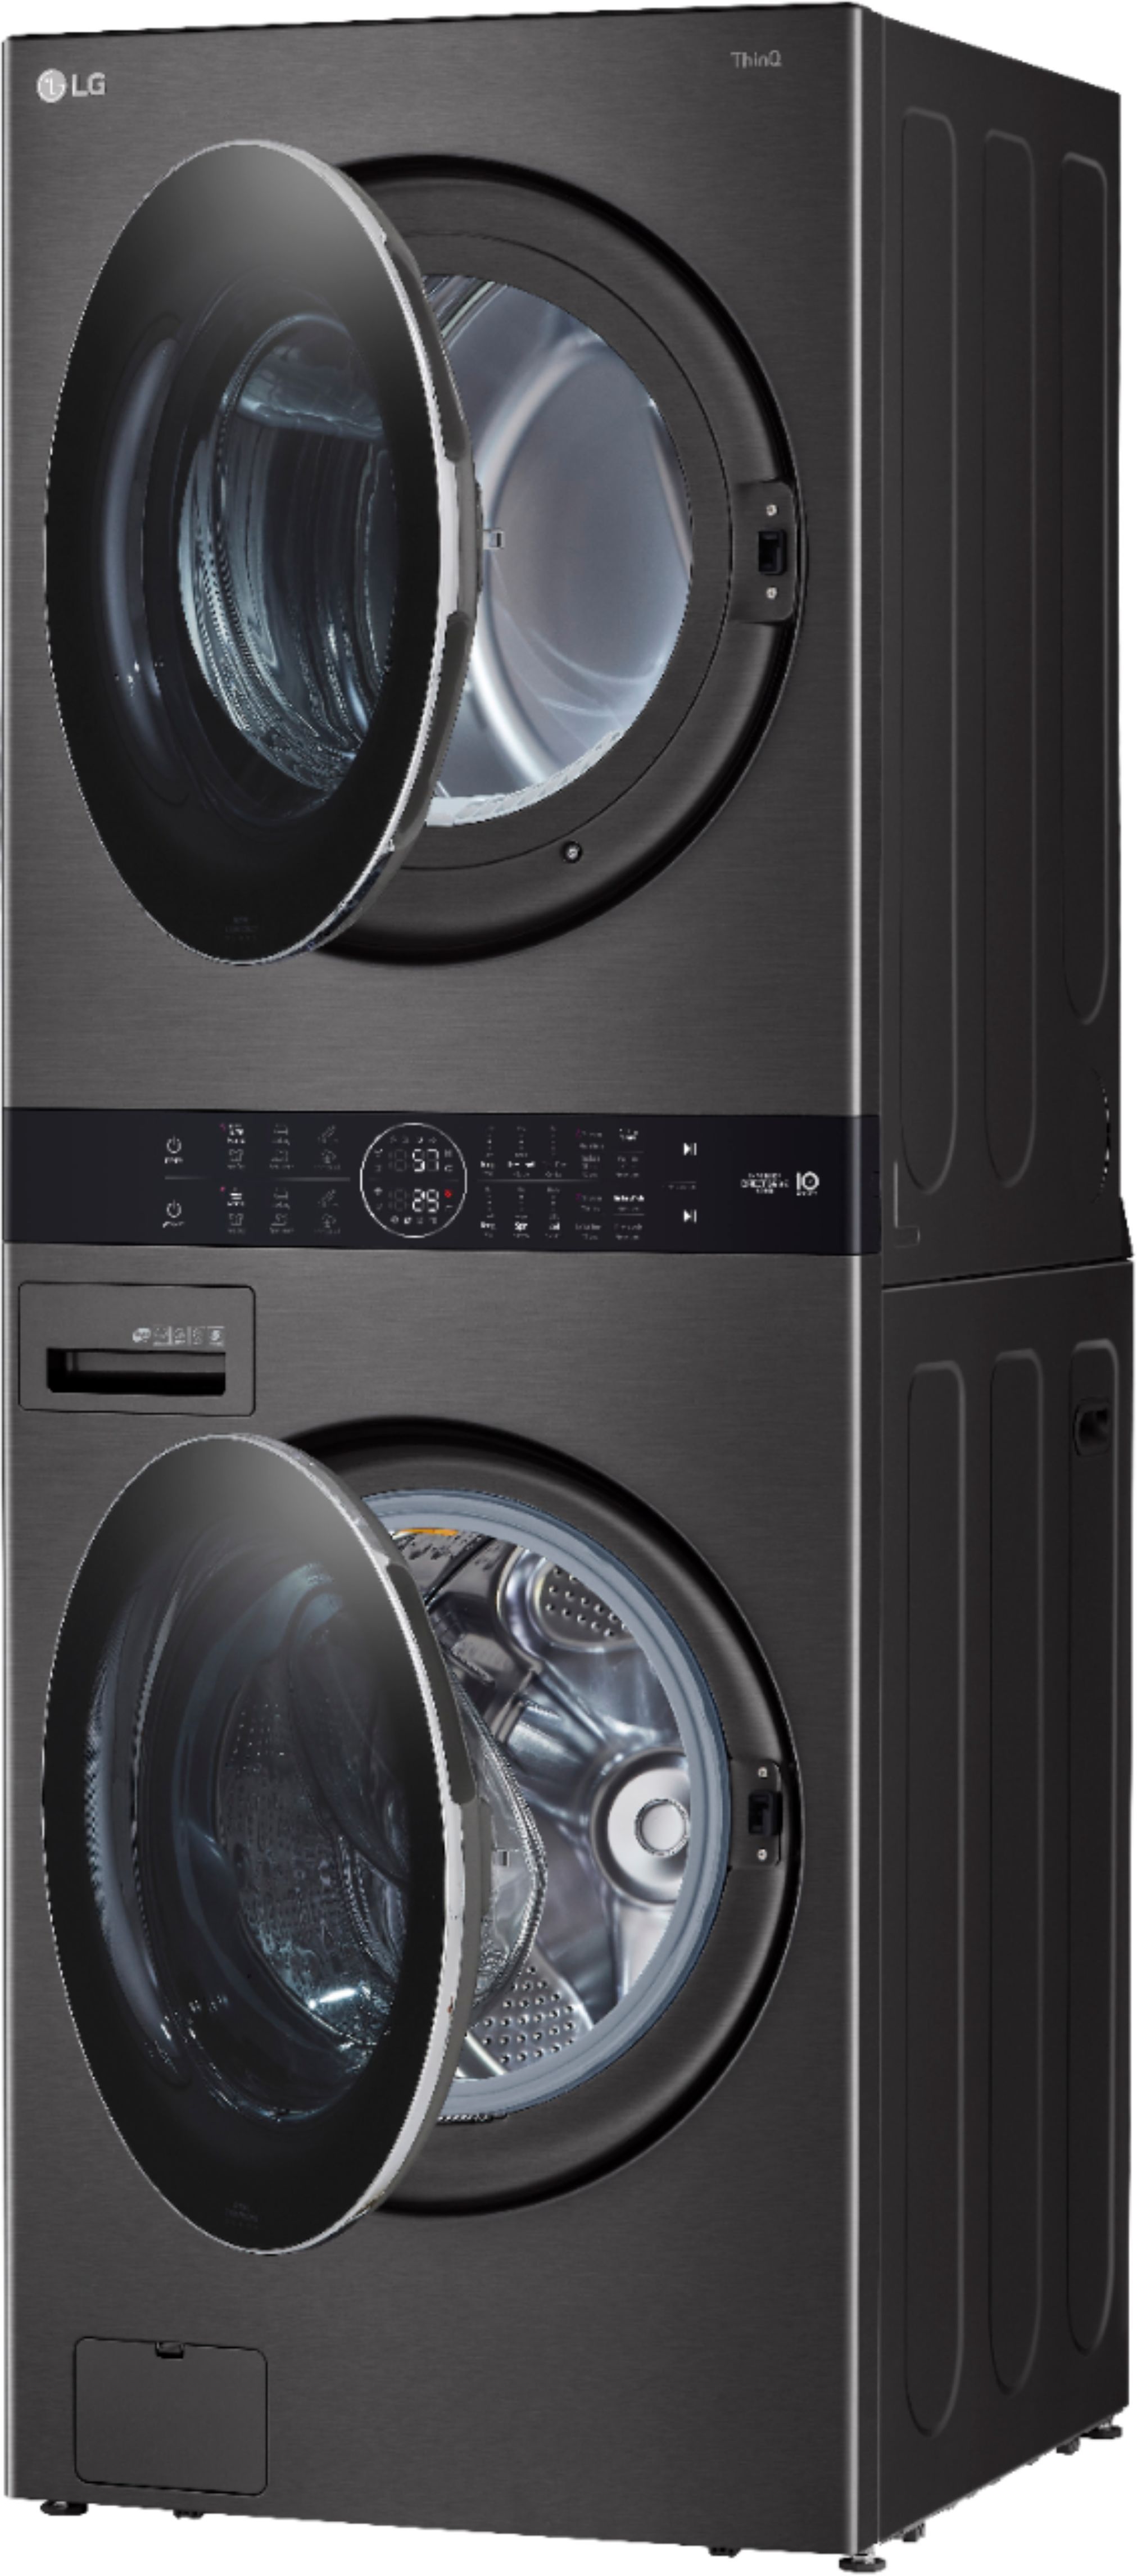 Front and Load Built-In Best HE Dryer WKEX200HBA - Steam 4.5 Electric 7.4 Intelligence with LG Cu. WashTower and Steel Black Ft. Washer Buy Cu. Ft. Smart